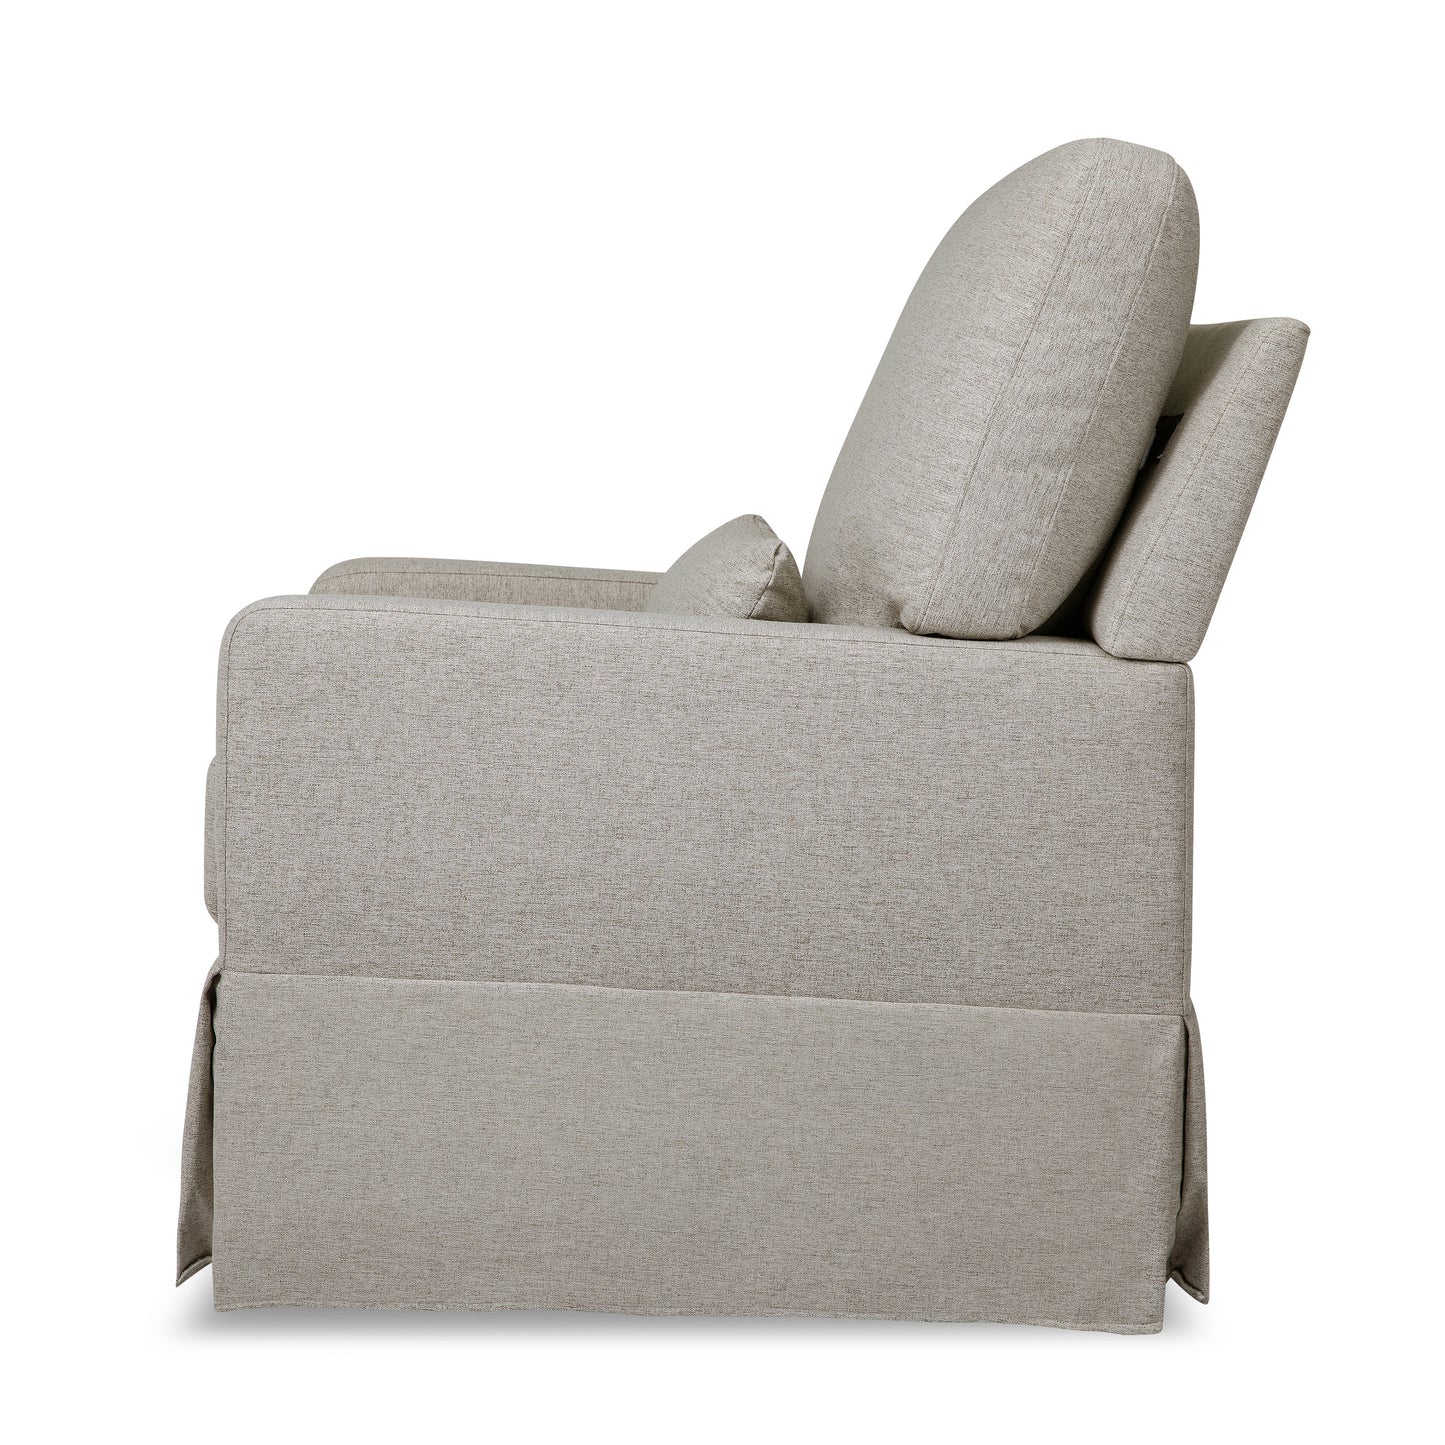 M21787PGEW,Crawford Pillowback Comfort Swivel Glider in Performance Grey Eco-Weave